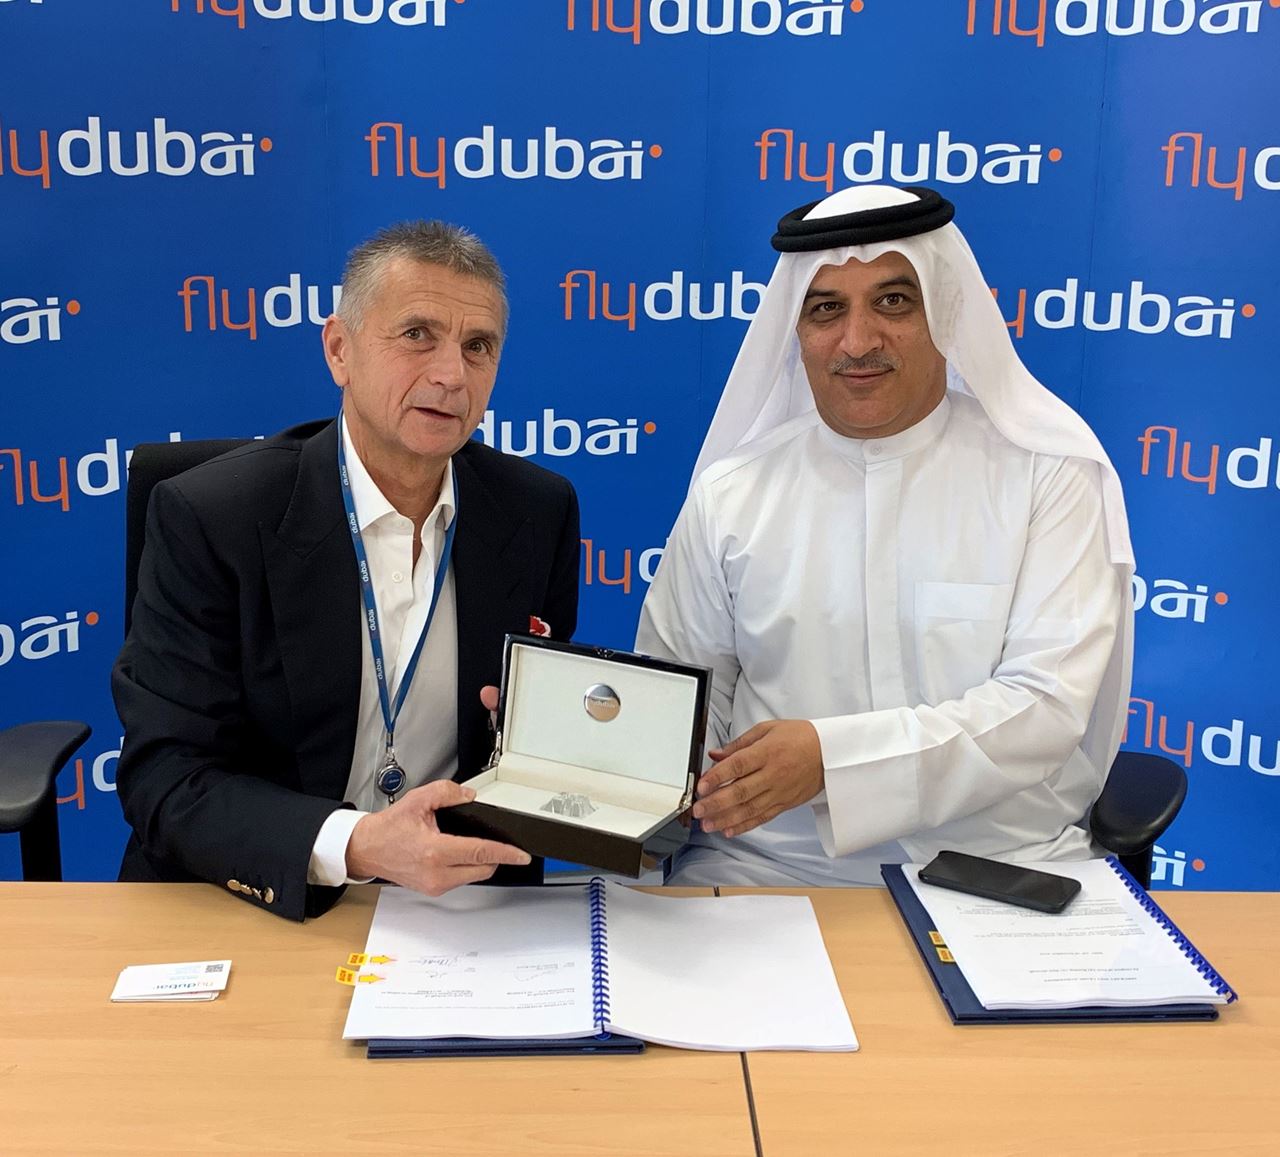 flydubai Confirms Wet Lease Agreement with Smartwings